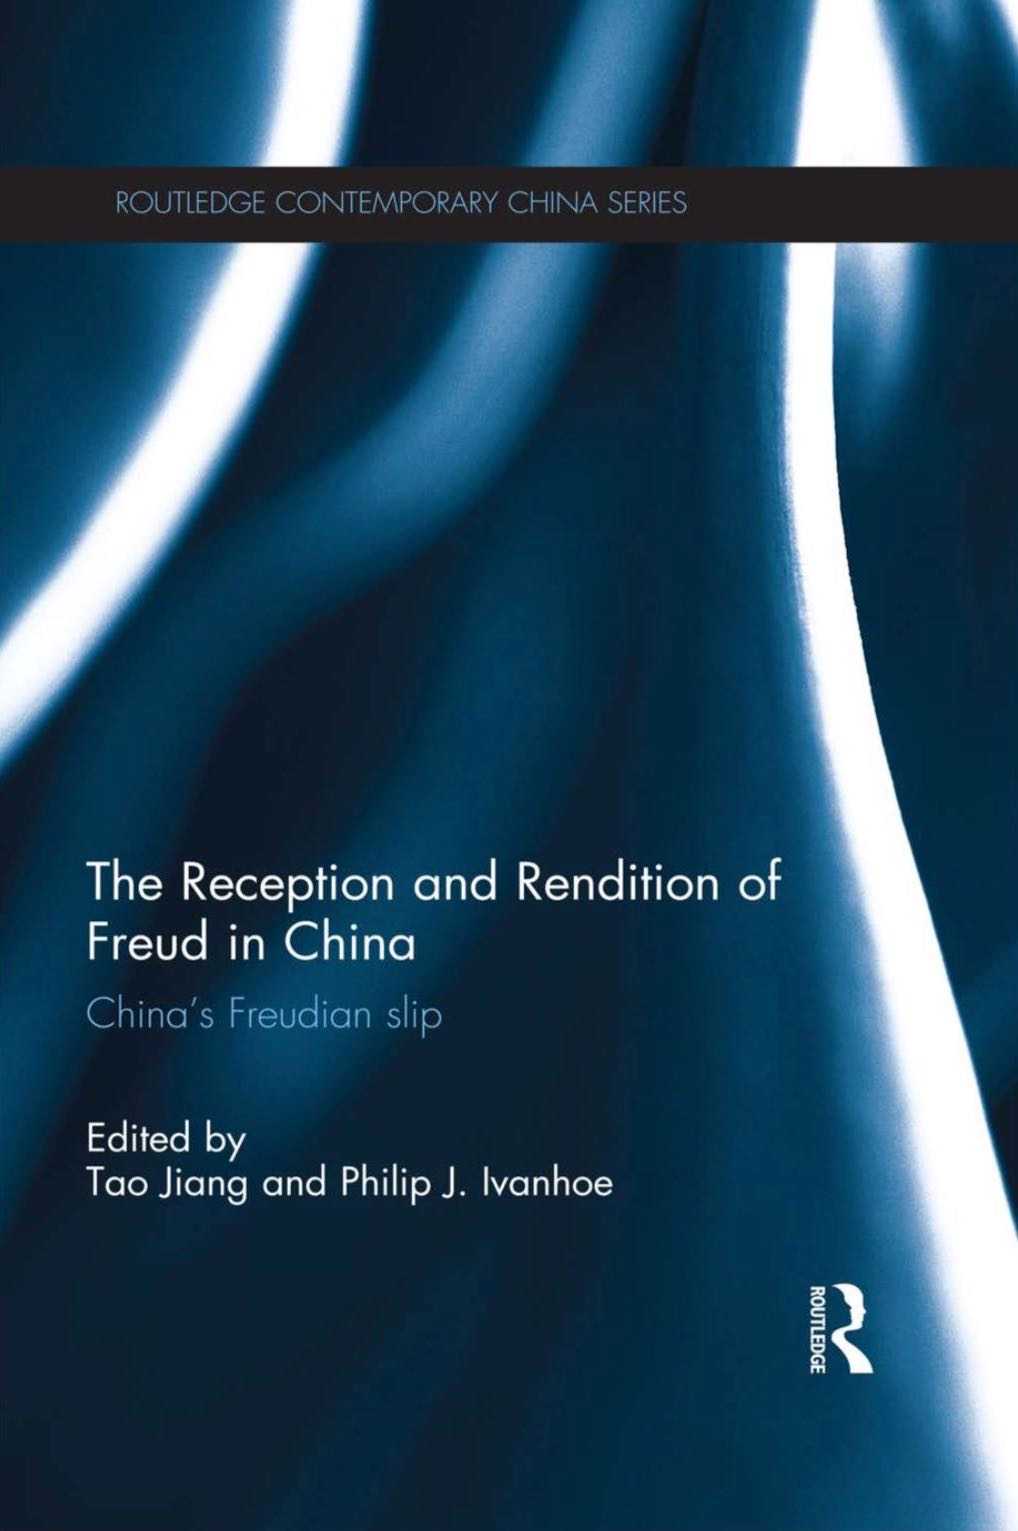 The Reception and Rendition of Freud in China - Tao Jiang, Philip J. Ivanhoe